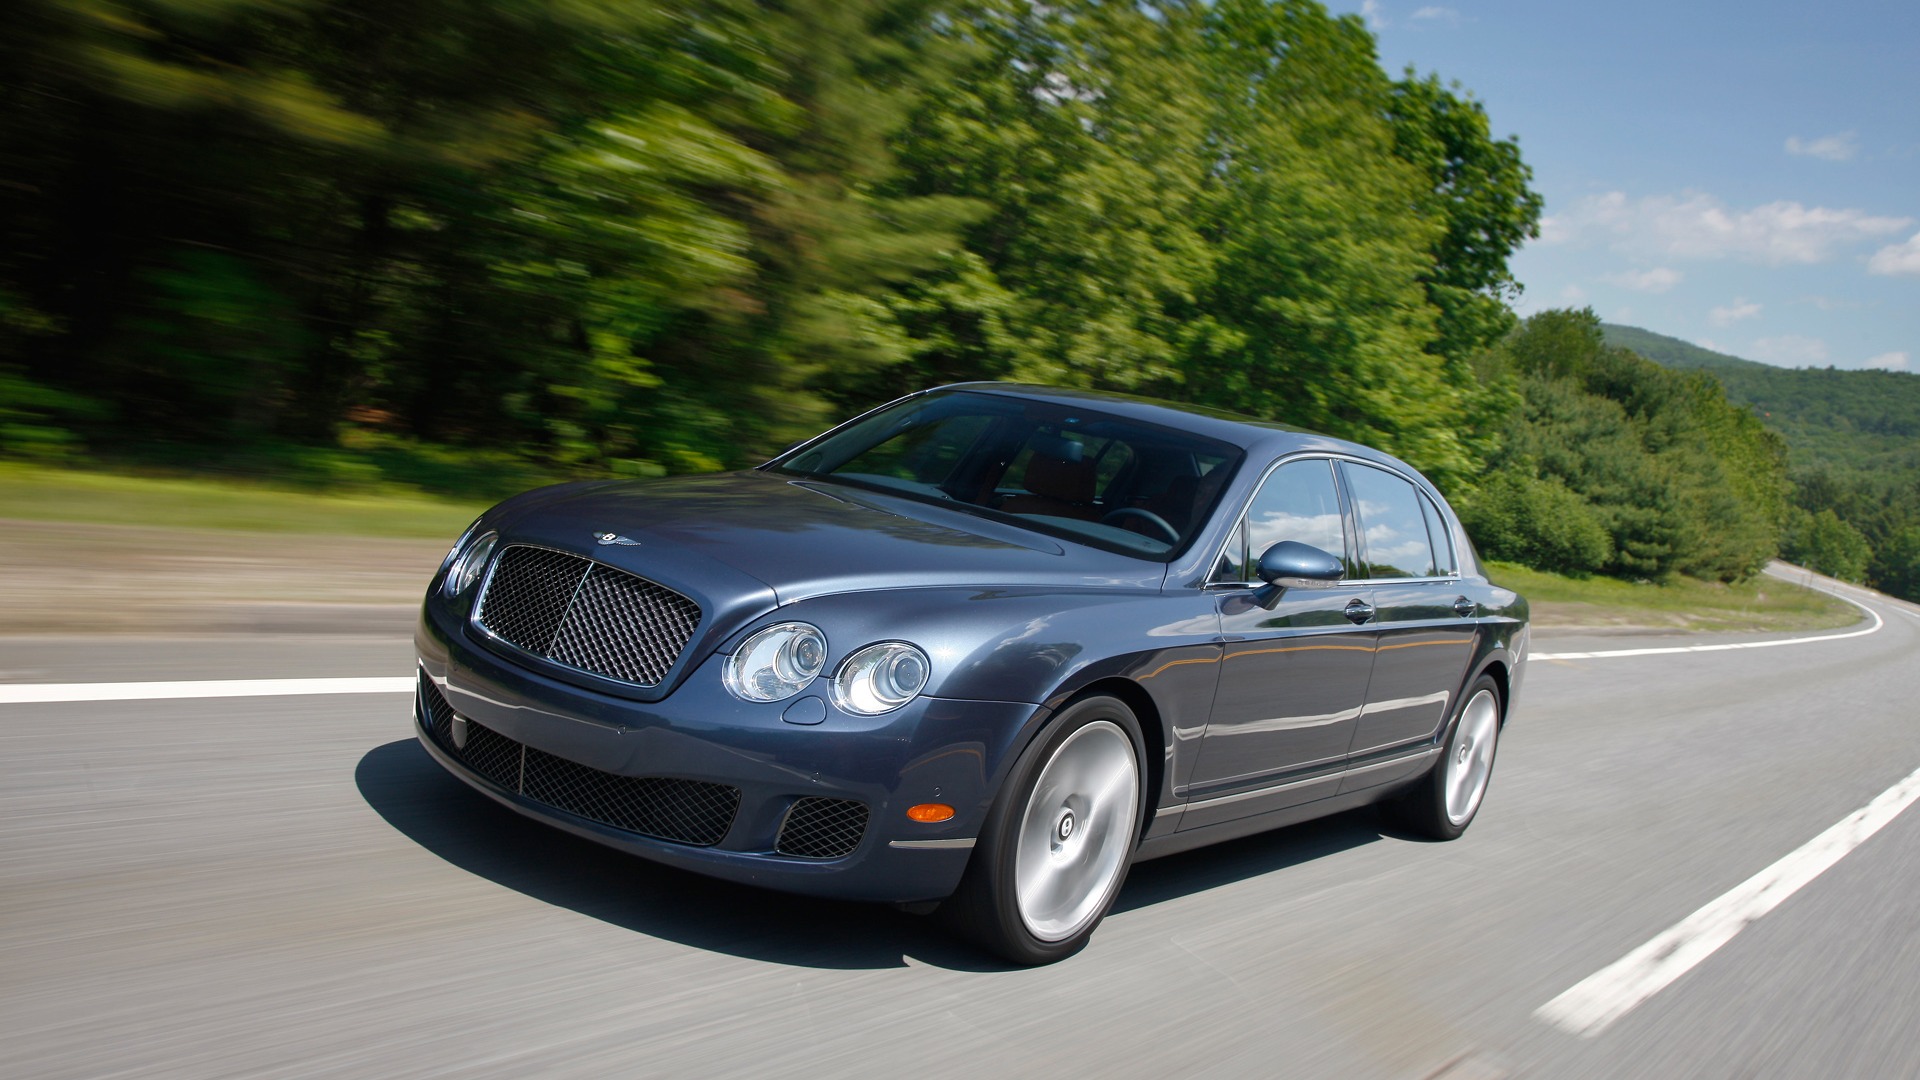 Bentley Continental Flying Spur Speed - 2008 賓利 #10 - 1920x1080